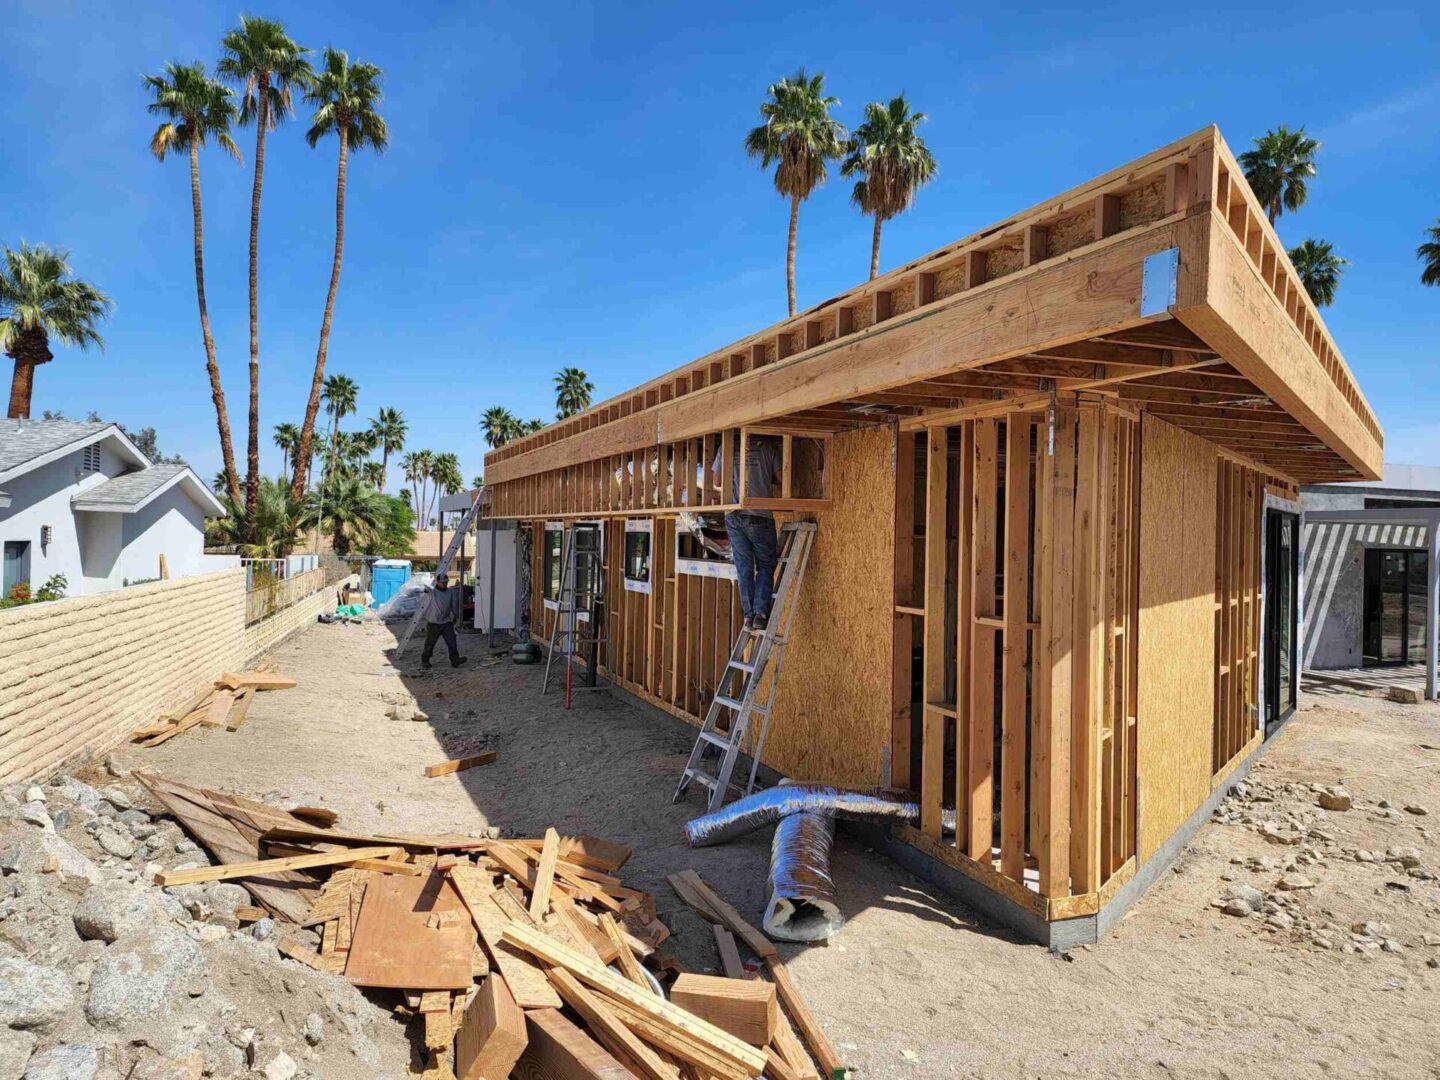 A house being built with palm trees in the background.